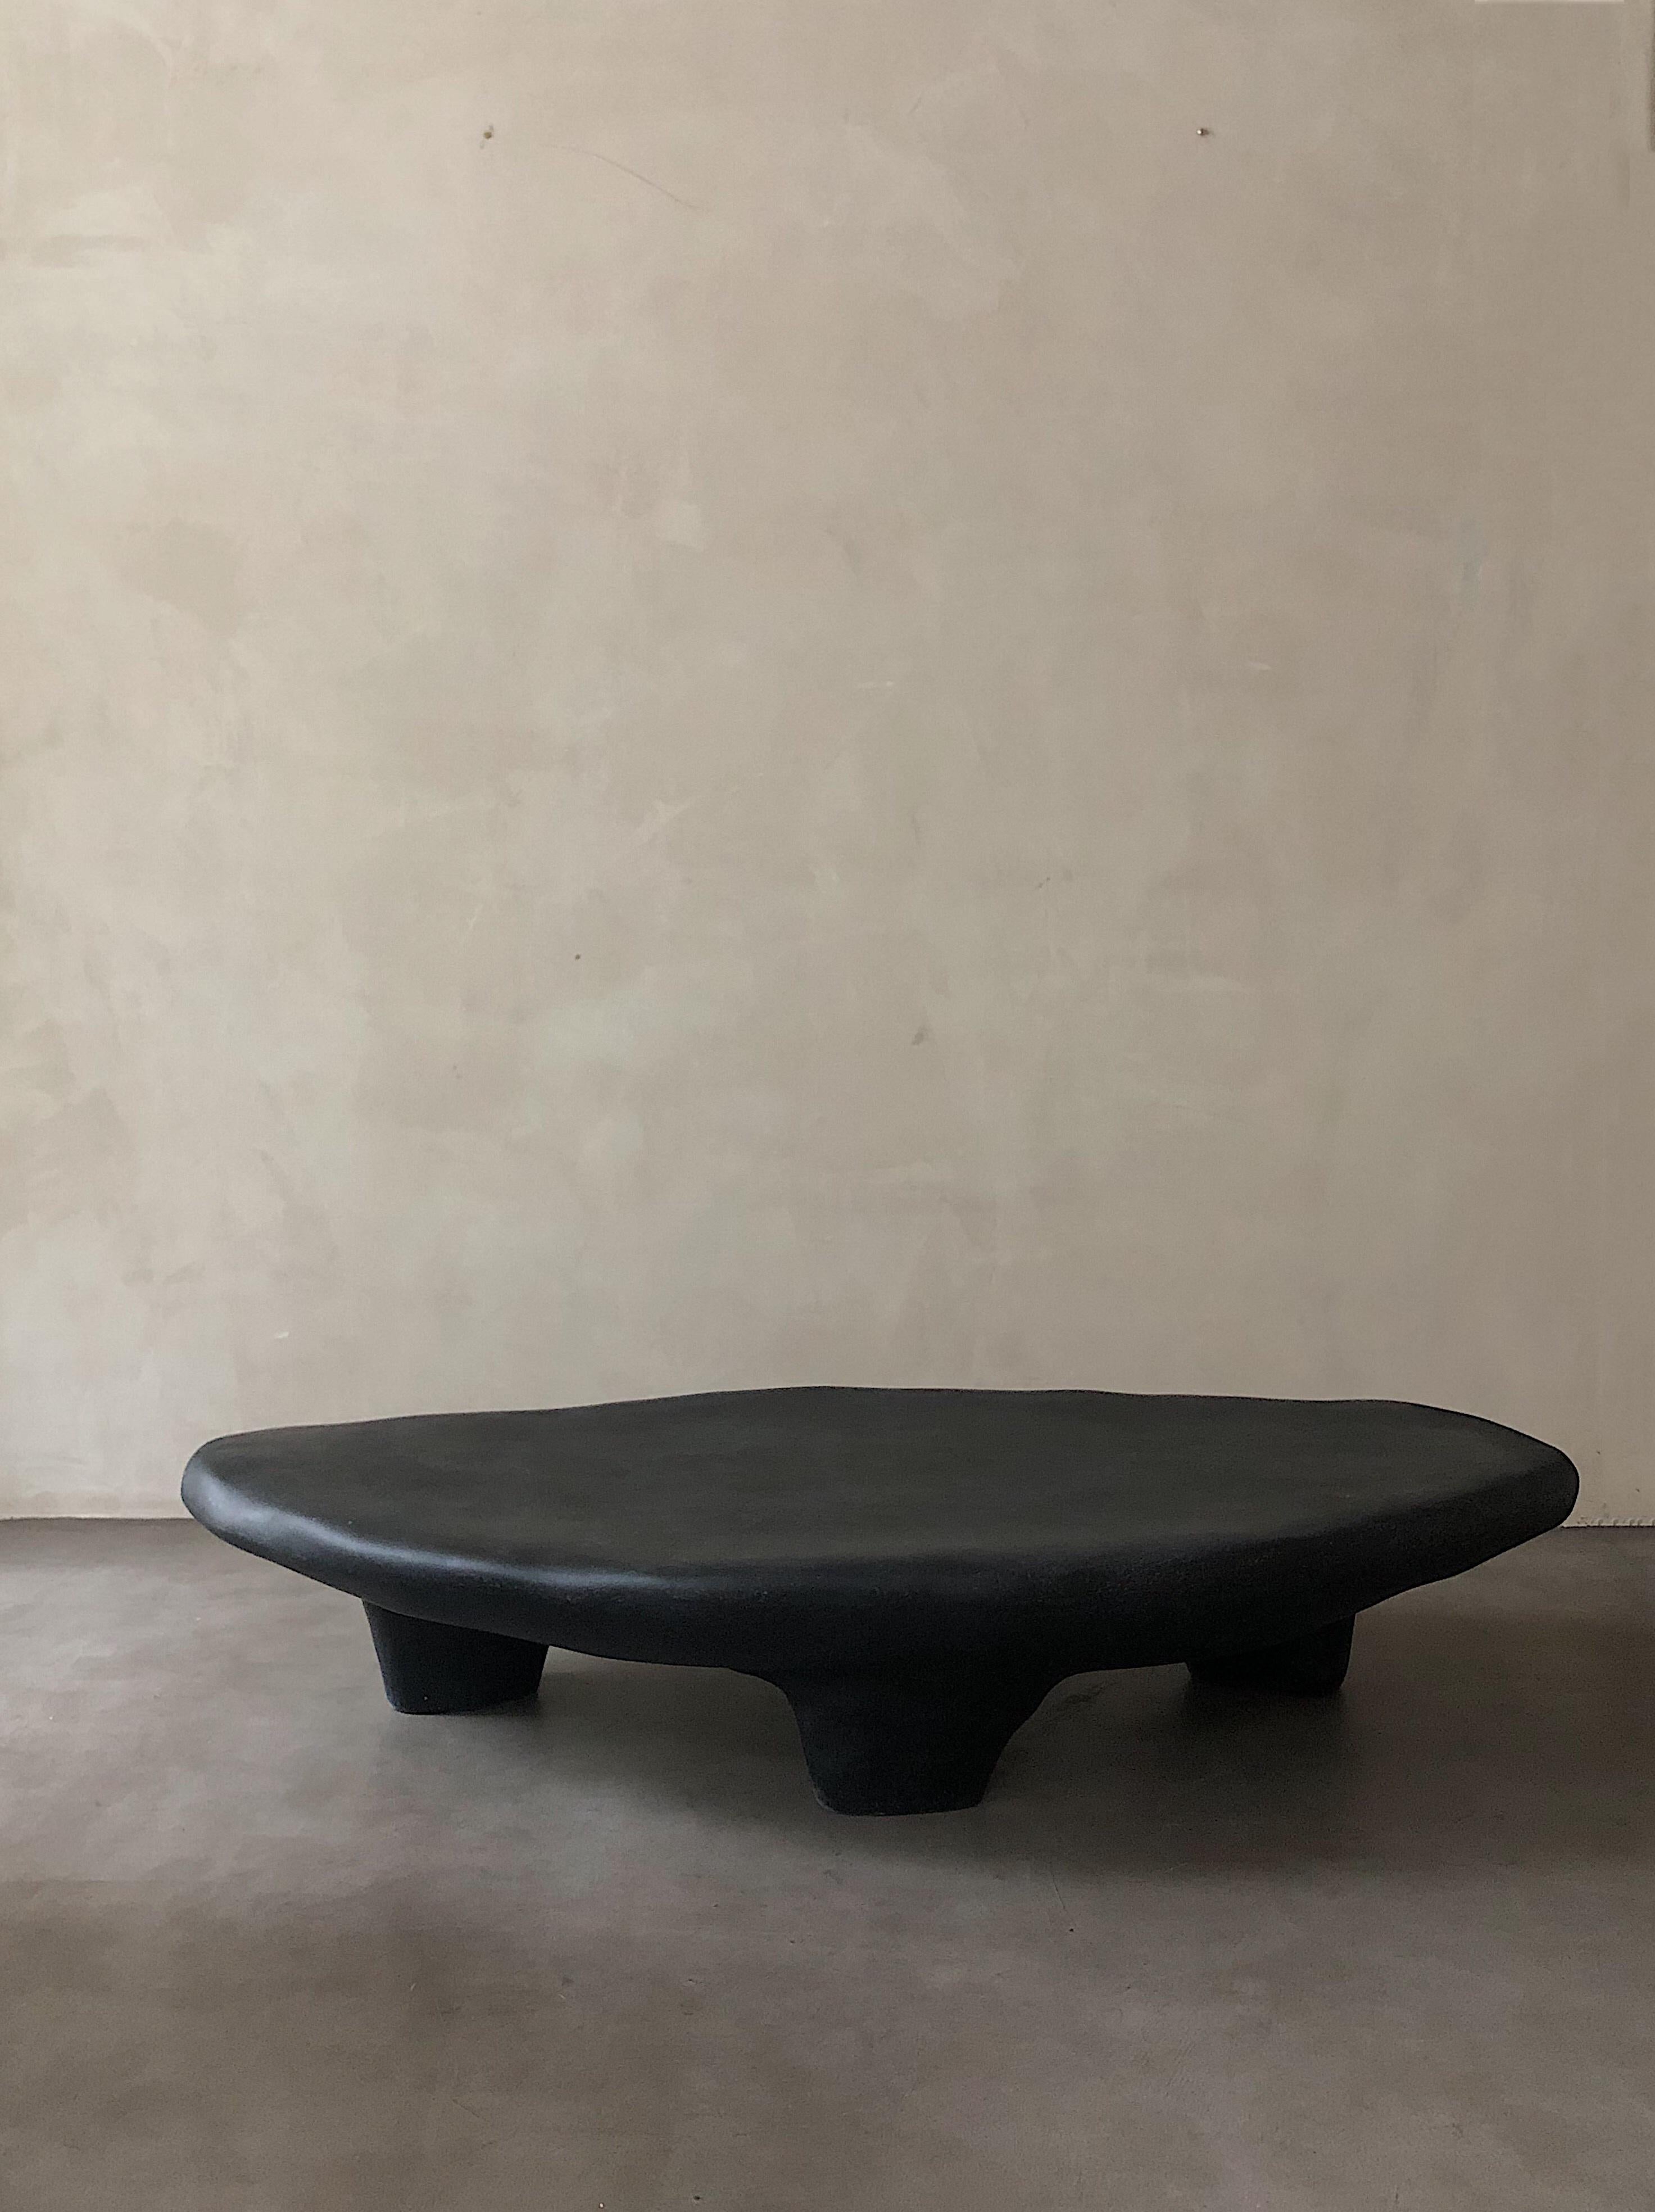 Black Tripod Coffee Table by kar
Materials: FRP.
Dimensions: 150 x 85 x 30 cm.
*This piece is suitable for outdoor use.

Inspired by three-leg utensils, which were the first creation of human beings in ancient times. The triangle structure and the